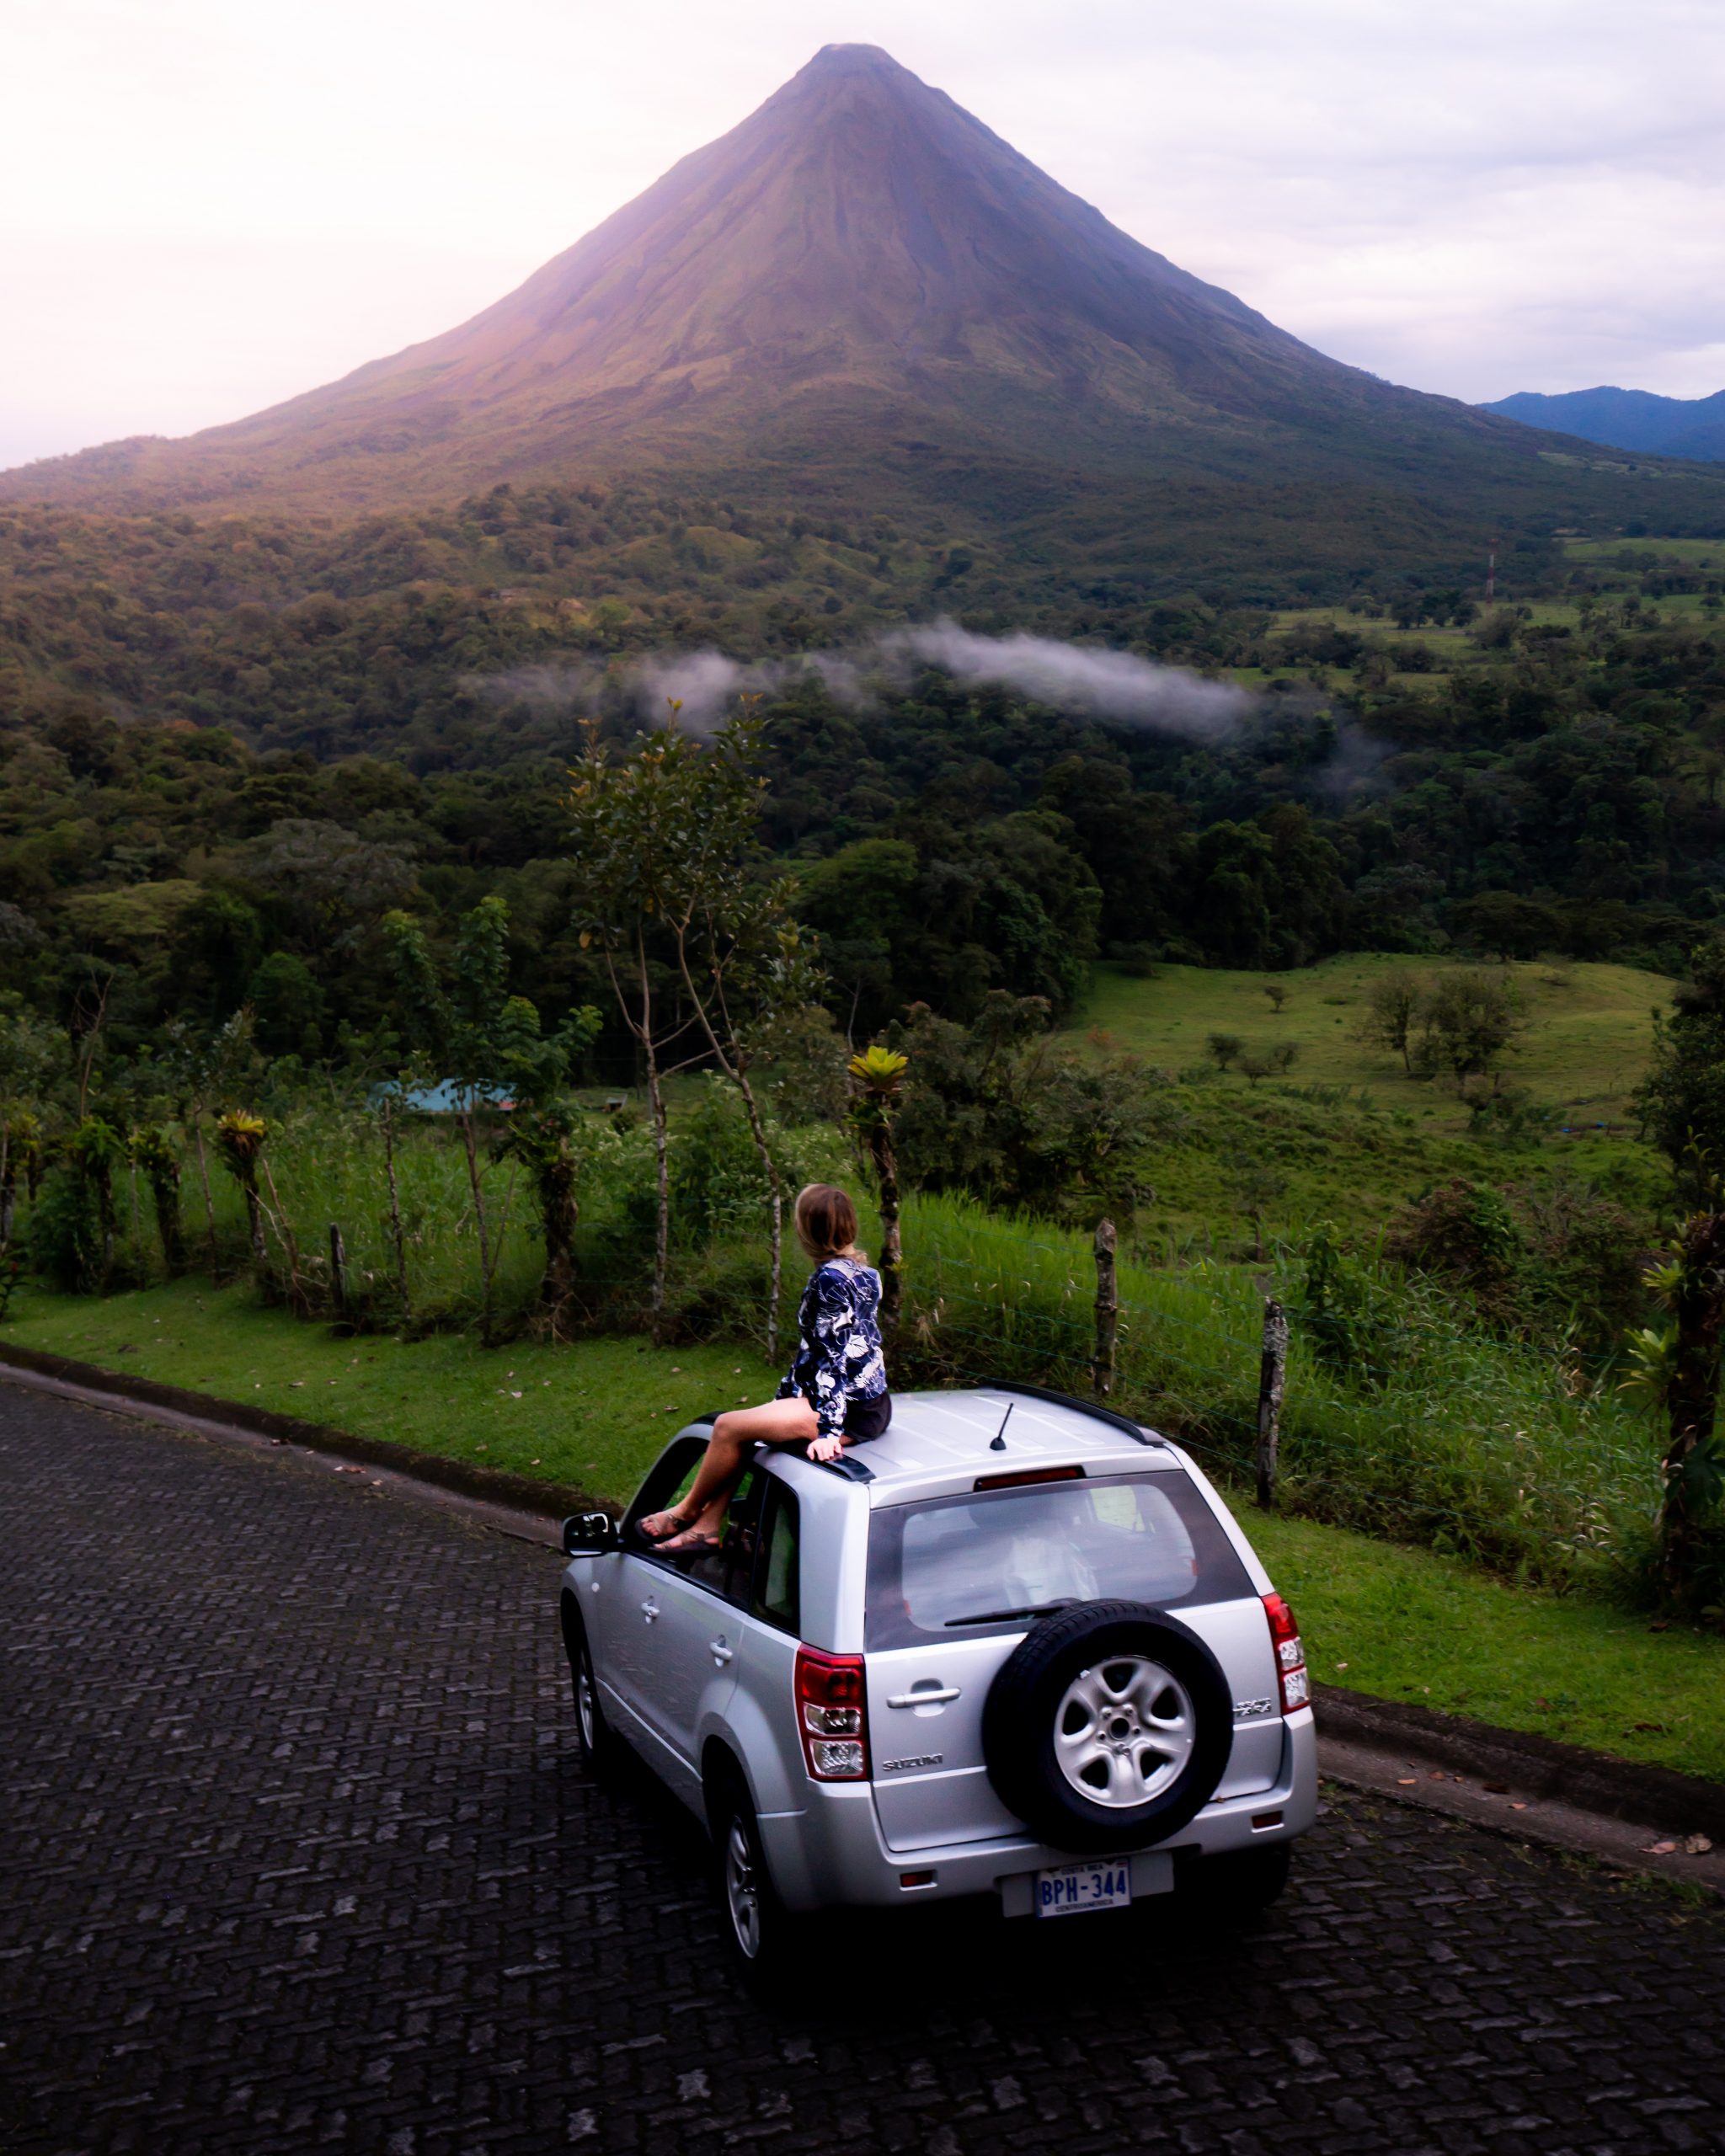 How To Get From La Fortuna To San Jose Airport - All Possible Ways, cheapest way from La Fortuna to San Jose Airport, La Fortuna to San Jose Airport, La Fortuna Costa Rica to San Jose Airport, La Fortuna to San Jose, La Fortuna costa rica to San Jose, La Fortuna to San Jose Airport bus